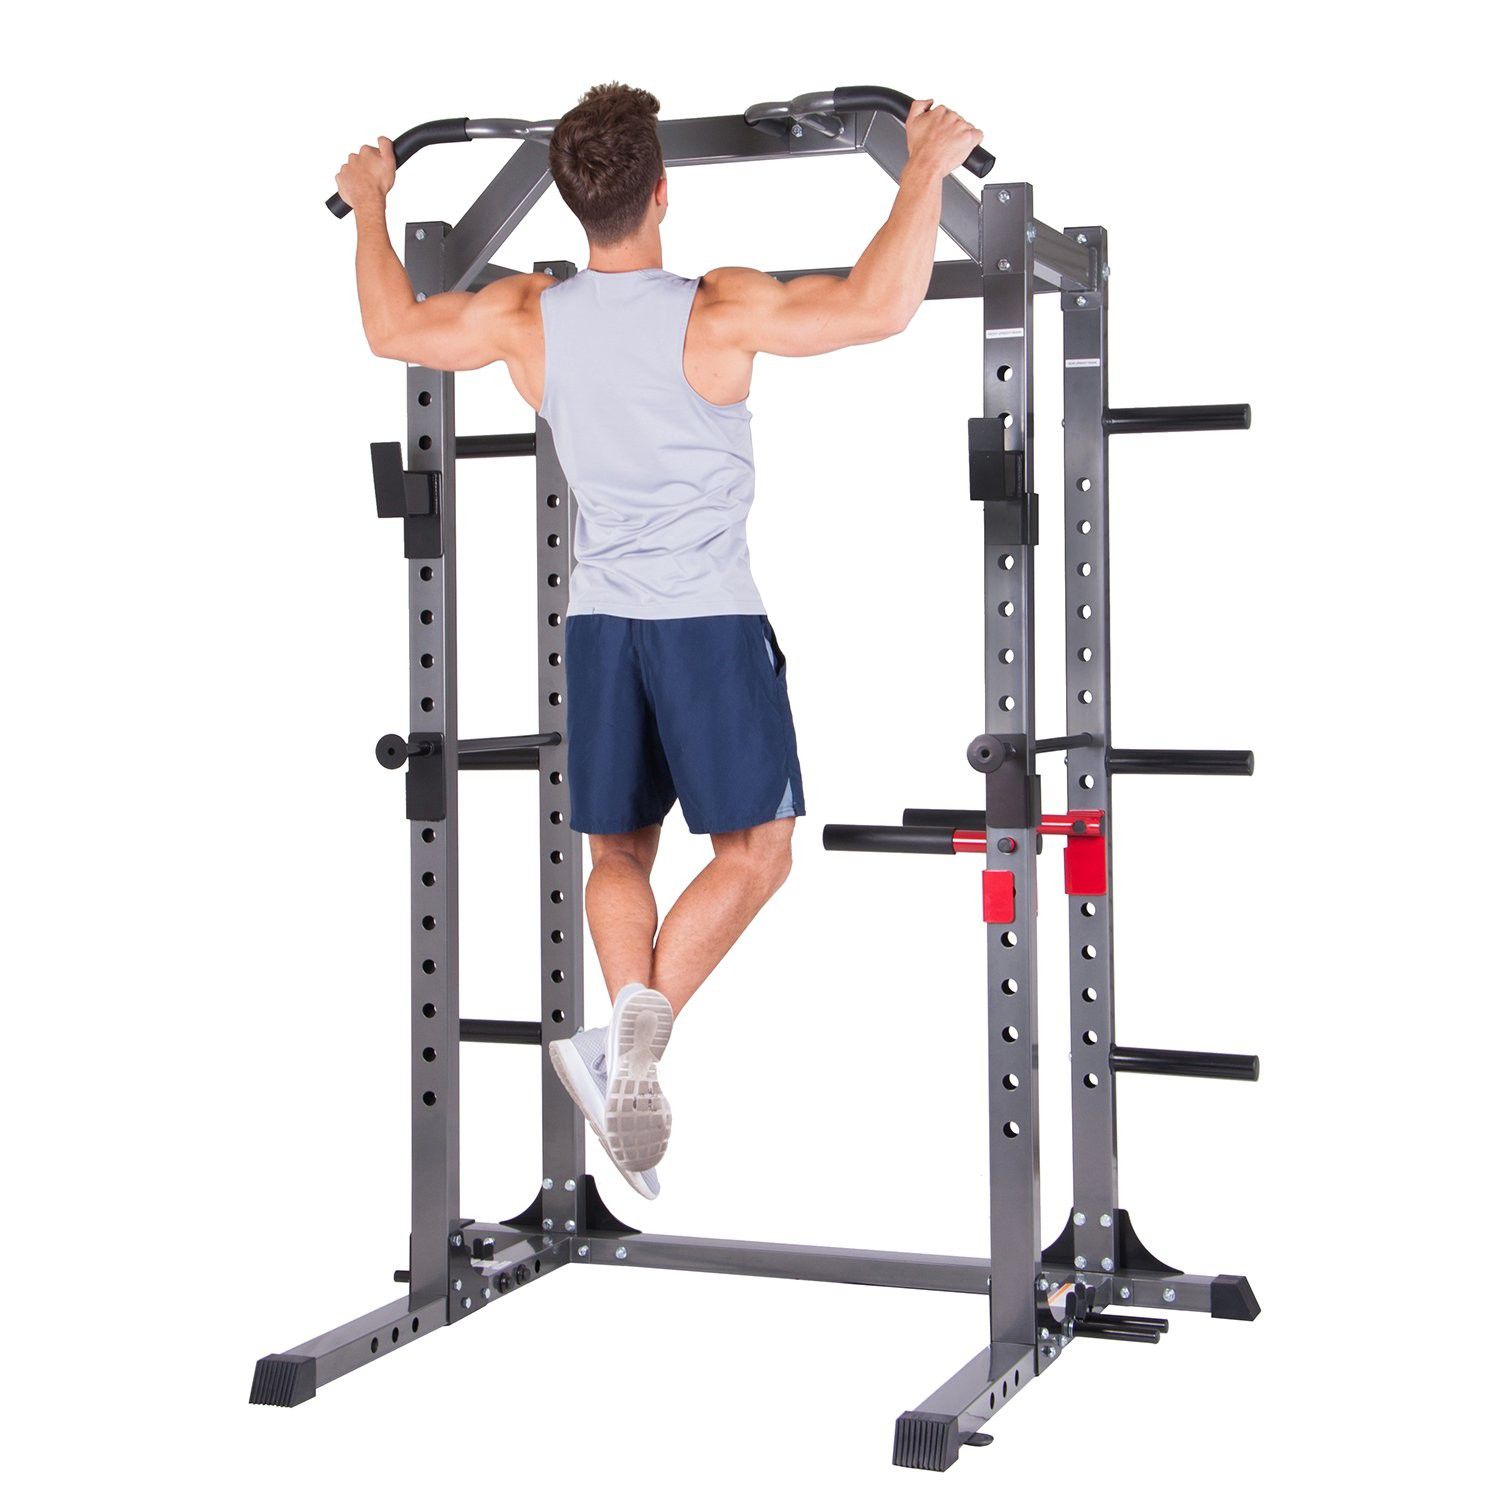 Deluxe Power Rack Cage System Home Gym Exercise Equipment